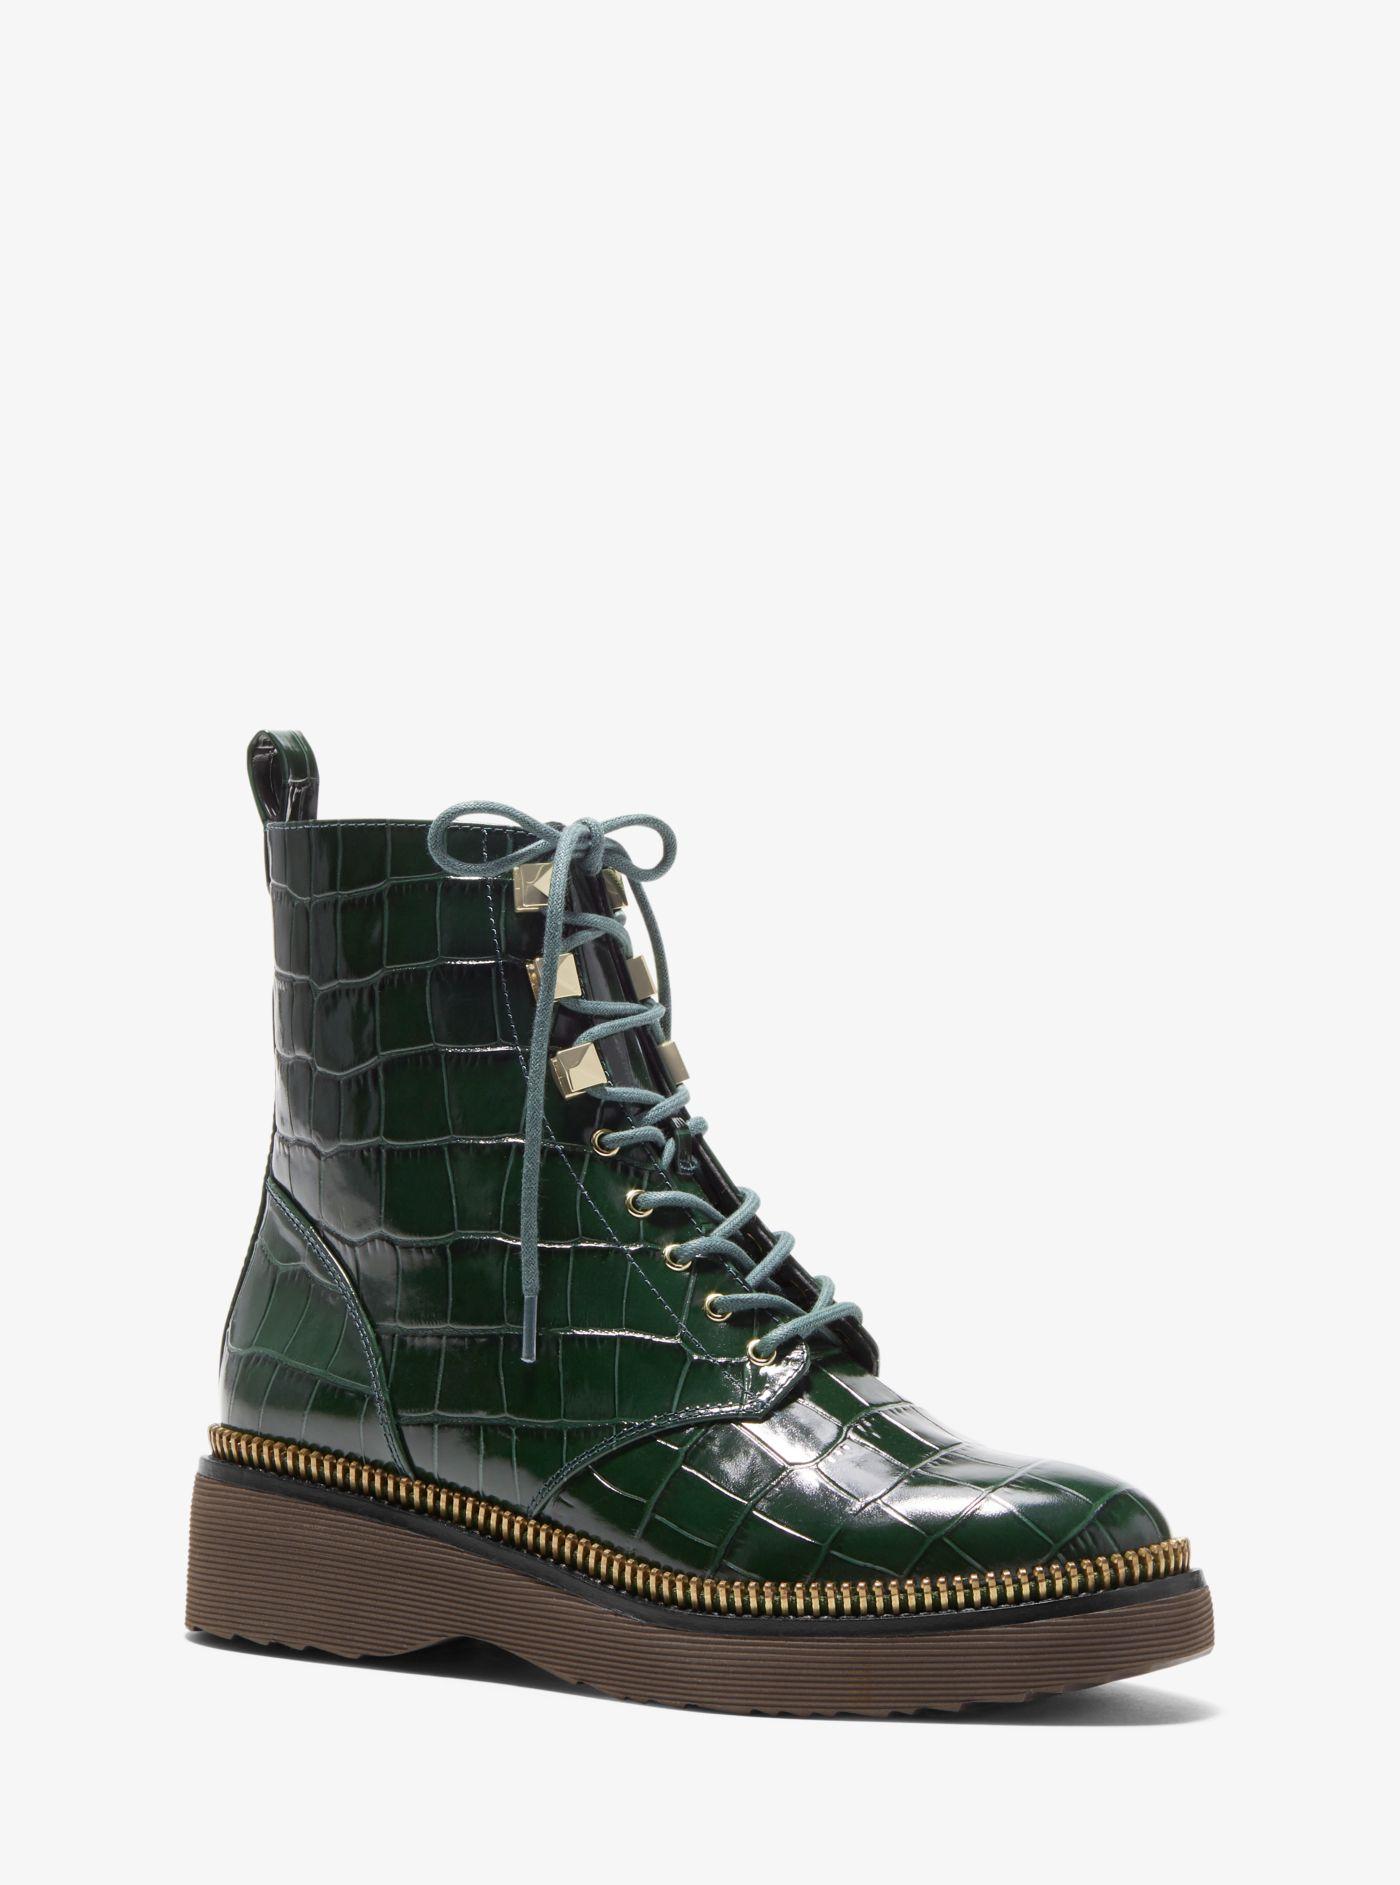 Michael Kors Haskell Crocodile Embossed Leather Combat Boot in Green | Lyst